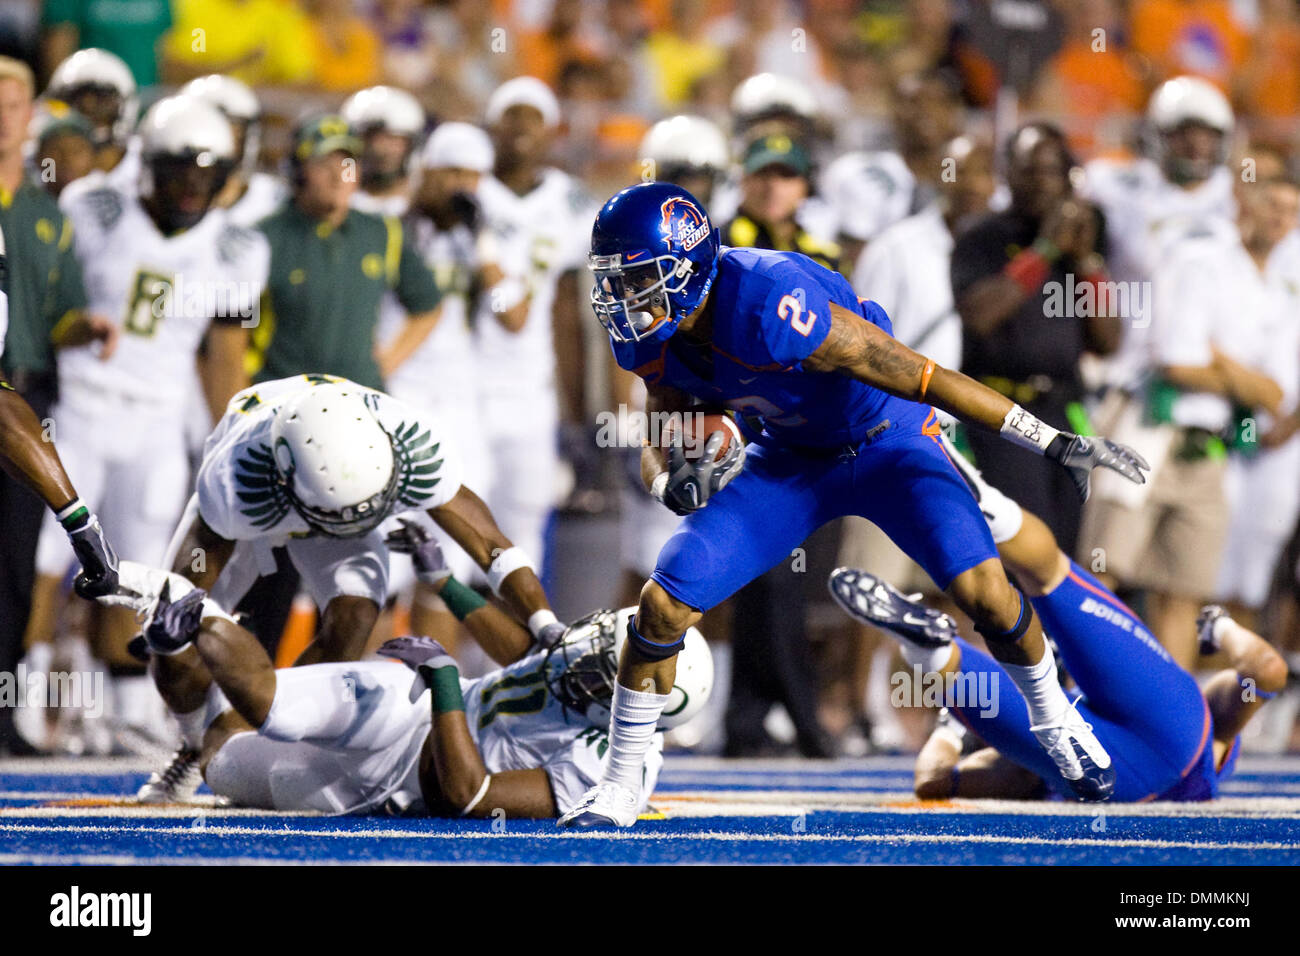 03 September 2009: Boise State's Austin Pettis (2) turns up field after making a reception during first half action of the Boise State - Oregon football  game. The Boise State Broncos defeated the Oregon Ducks 18-9 at Bronco Stadium in Boise ID. (Credit Image: © Southcreek Global/ZUMApress.com) Stock Photo